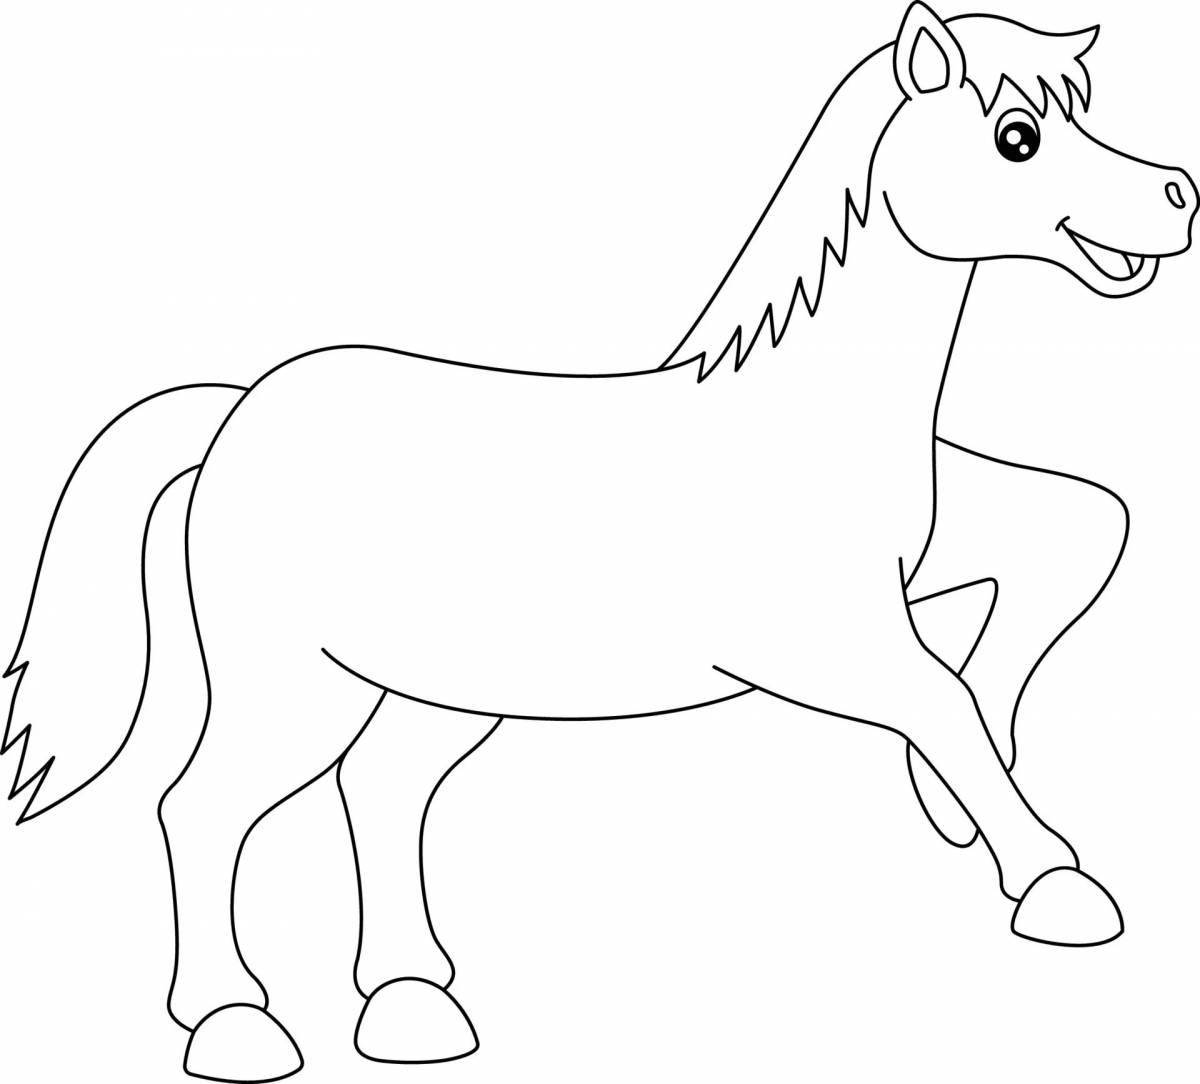 Bright coloring horse for children 4-5 years old